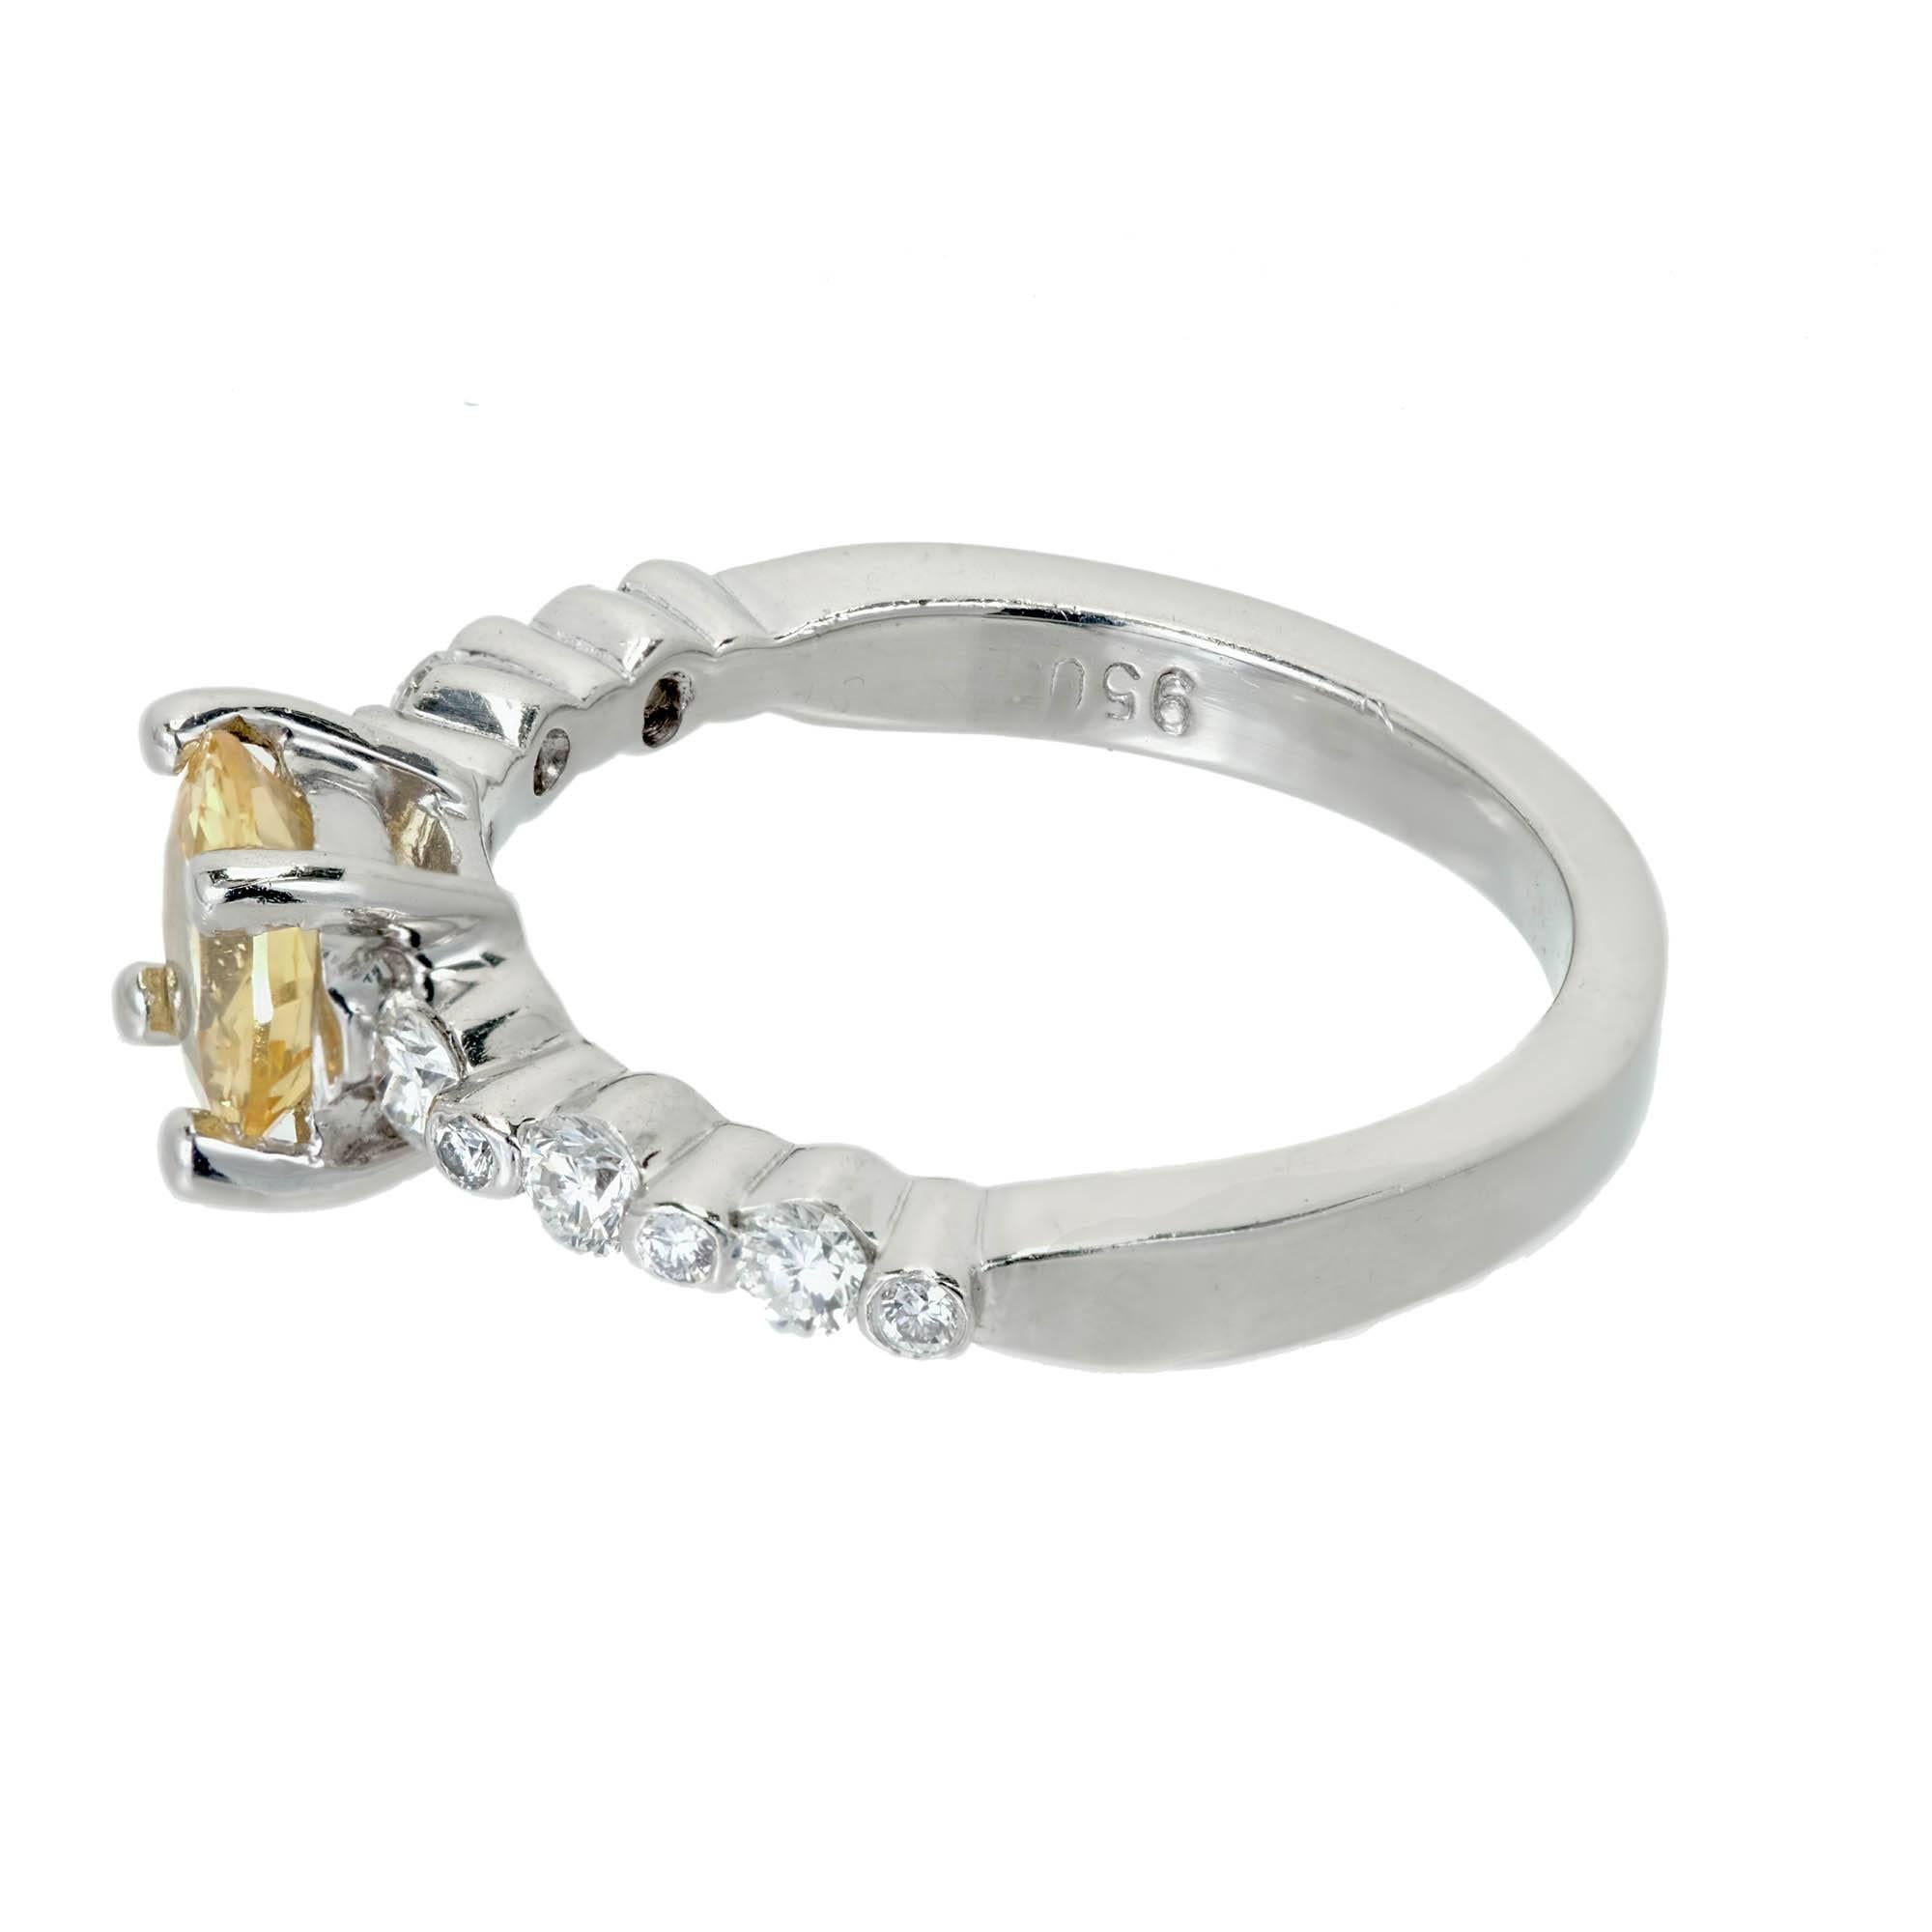 1.05 Carat Natural Fancy Yellow Sapphire Diamond Platinum Engagement Ring In Good Condition For Sale In Stamford, CT